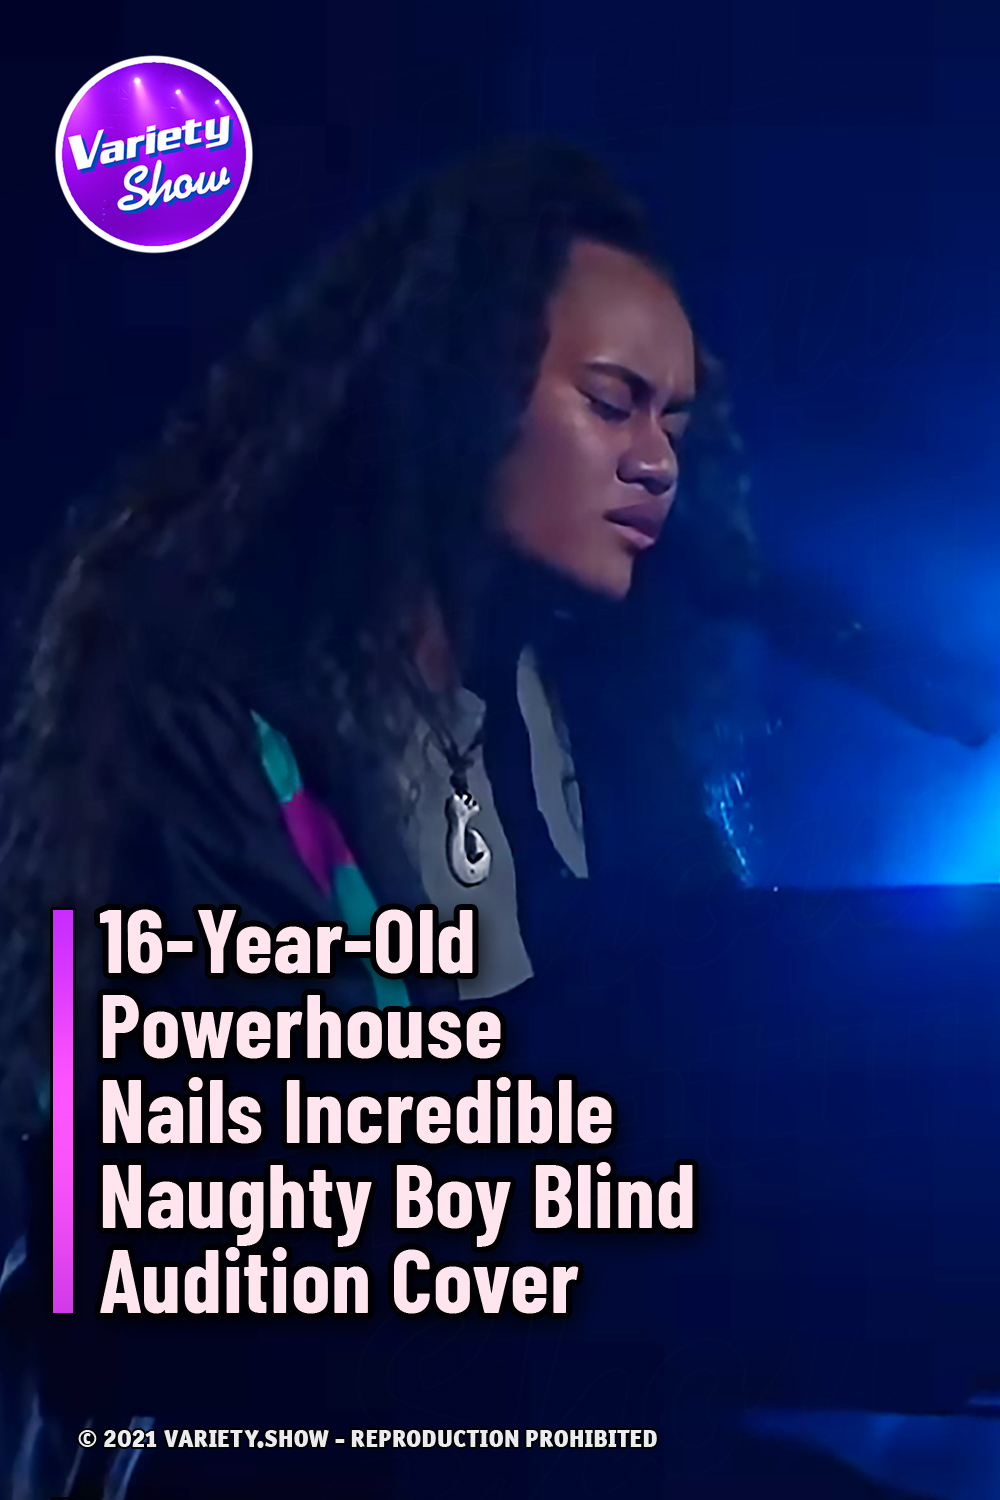 16-Year-Old Powerhouse Nails Incredible Naughty Boy Blind Audition Cover